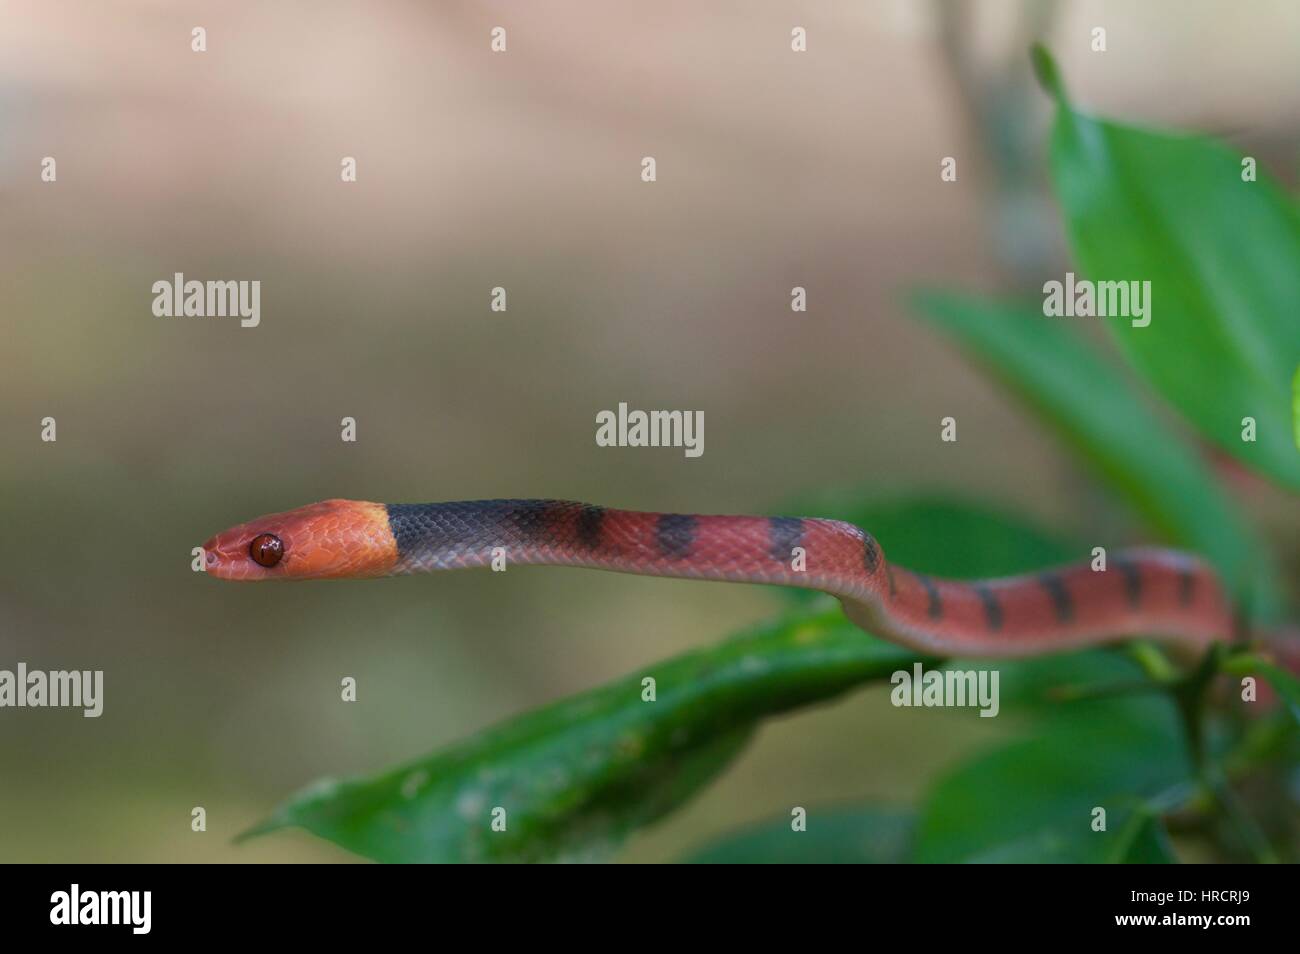 A Red Vine Snake (Siphlophis compressus) in the Amazon rainforest in Loreto, Peru Stock Photo